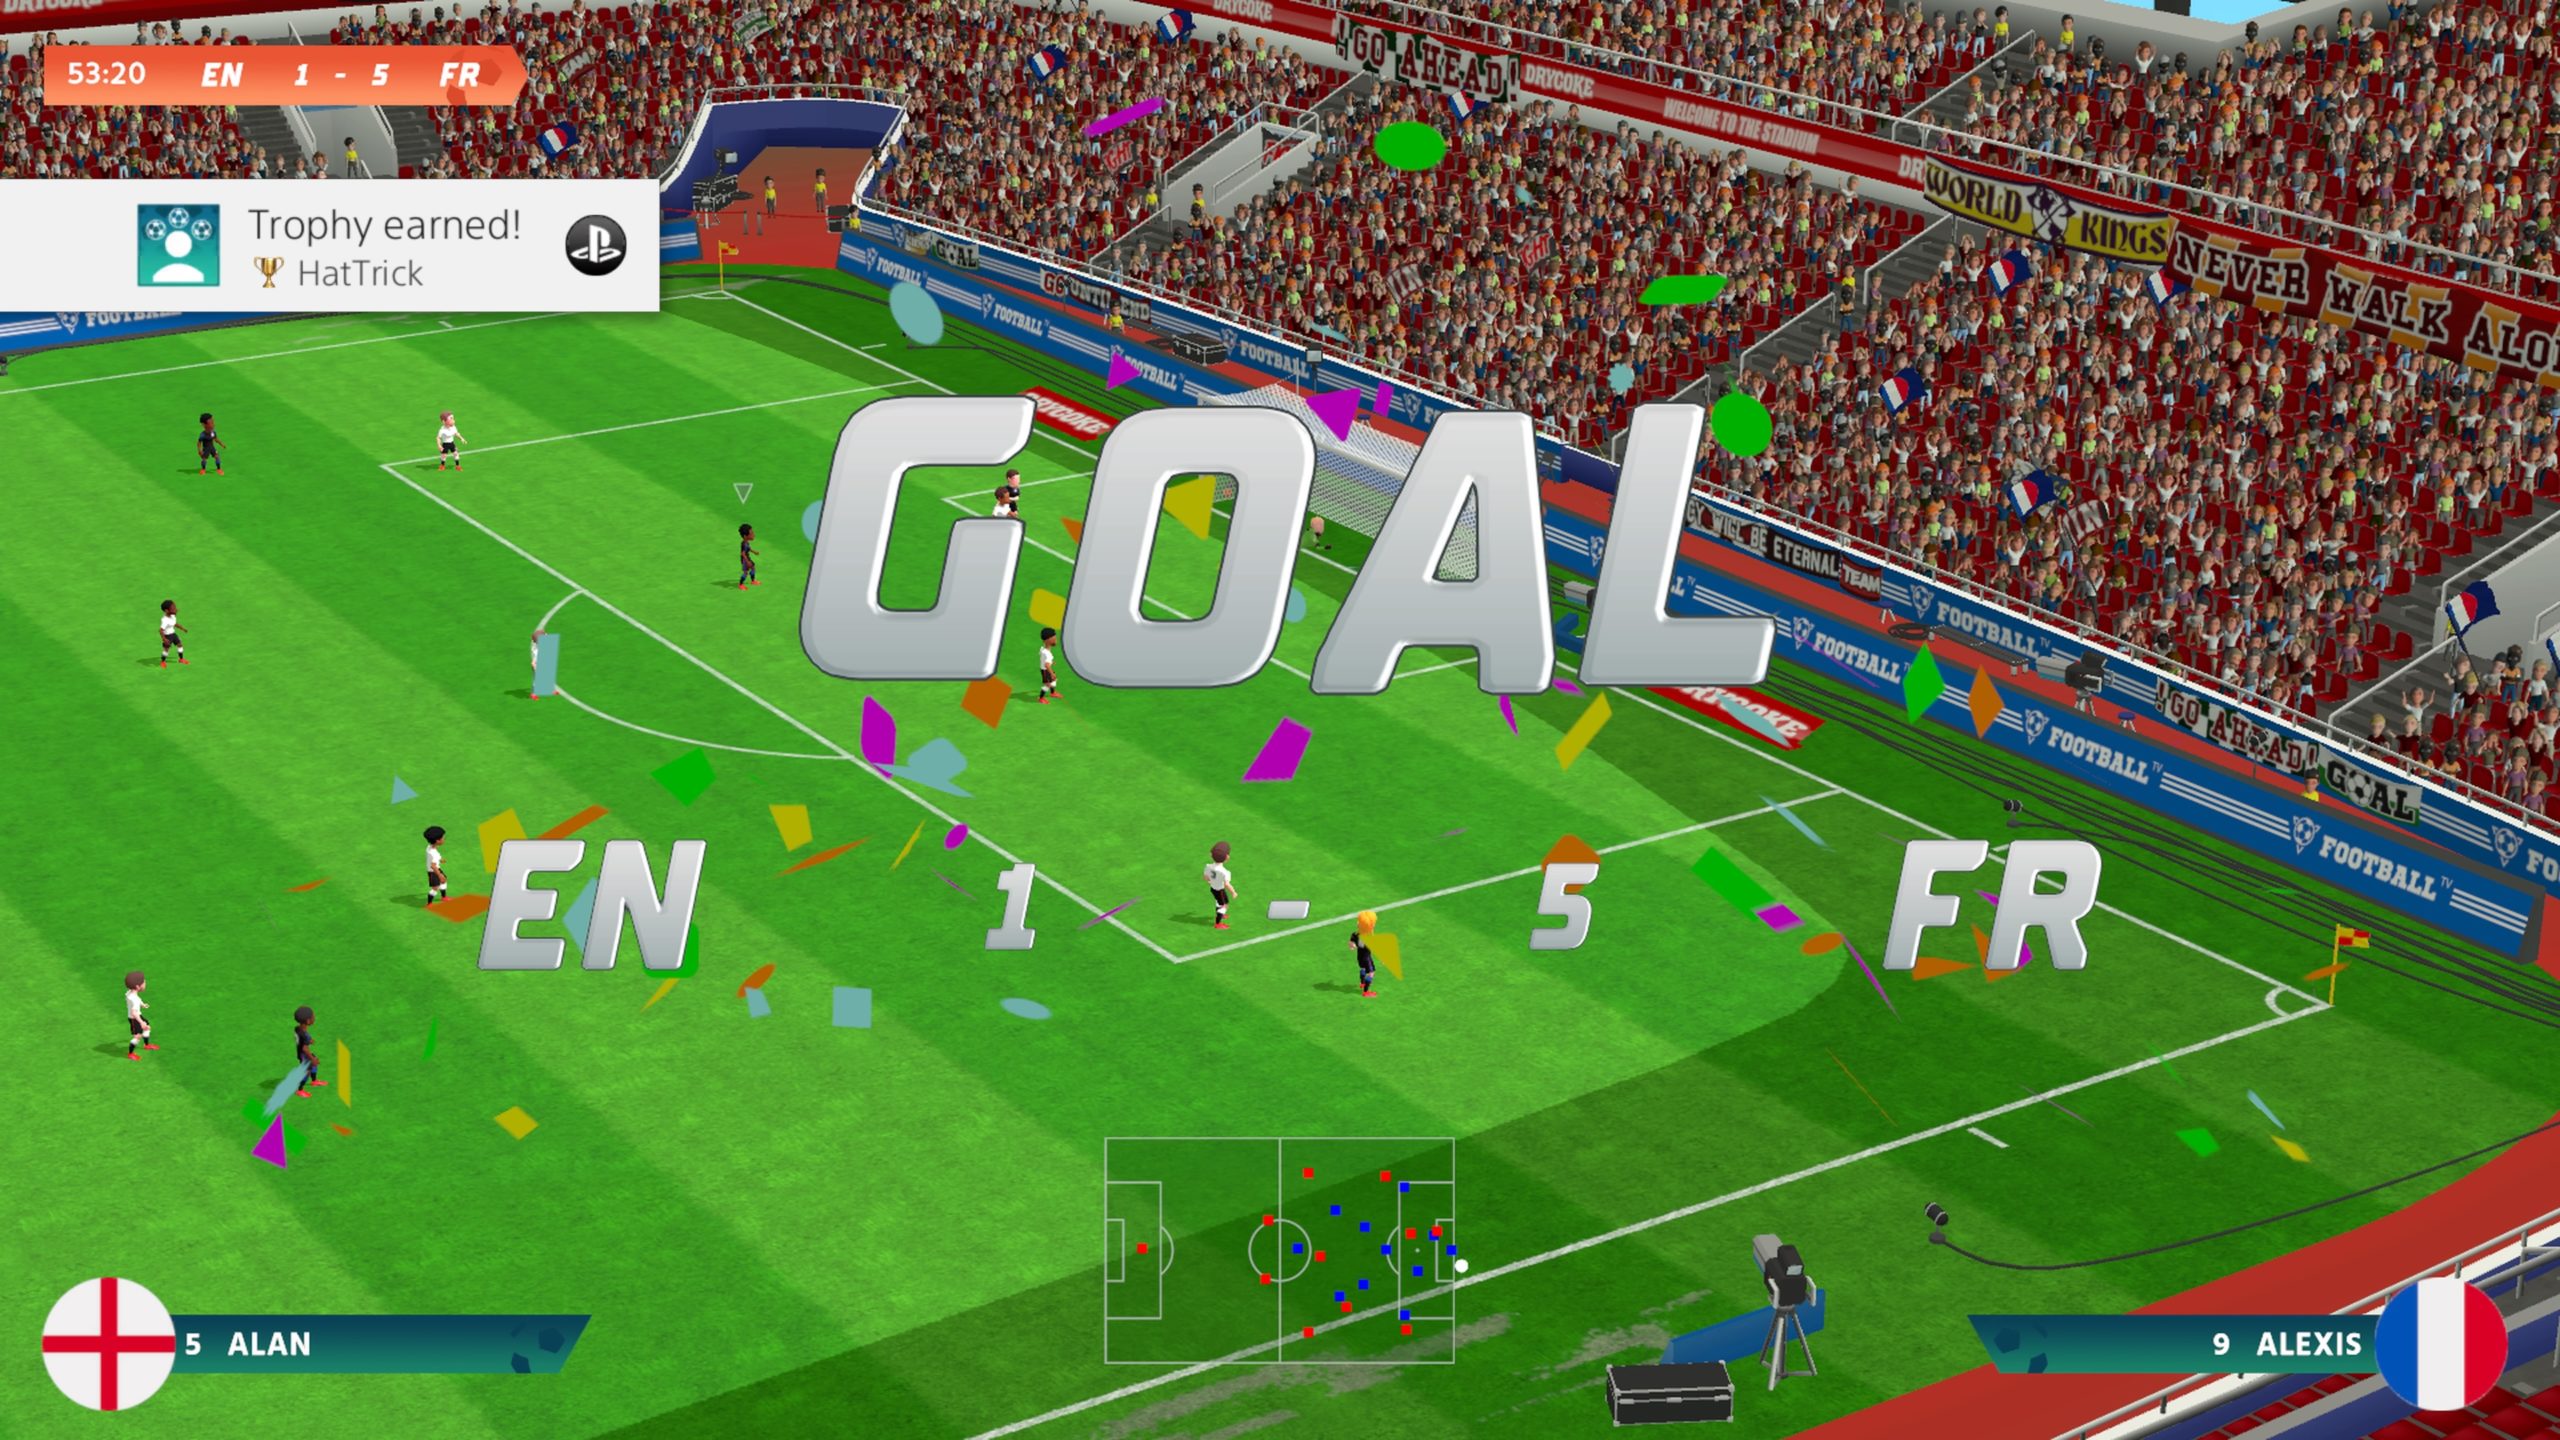 Super Soccer Blast Review Hard To Find Better Bang For Your Buck